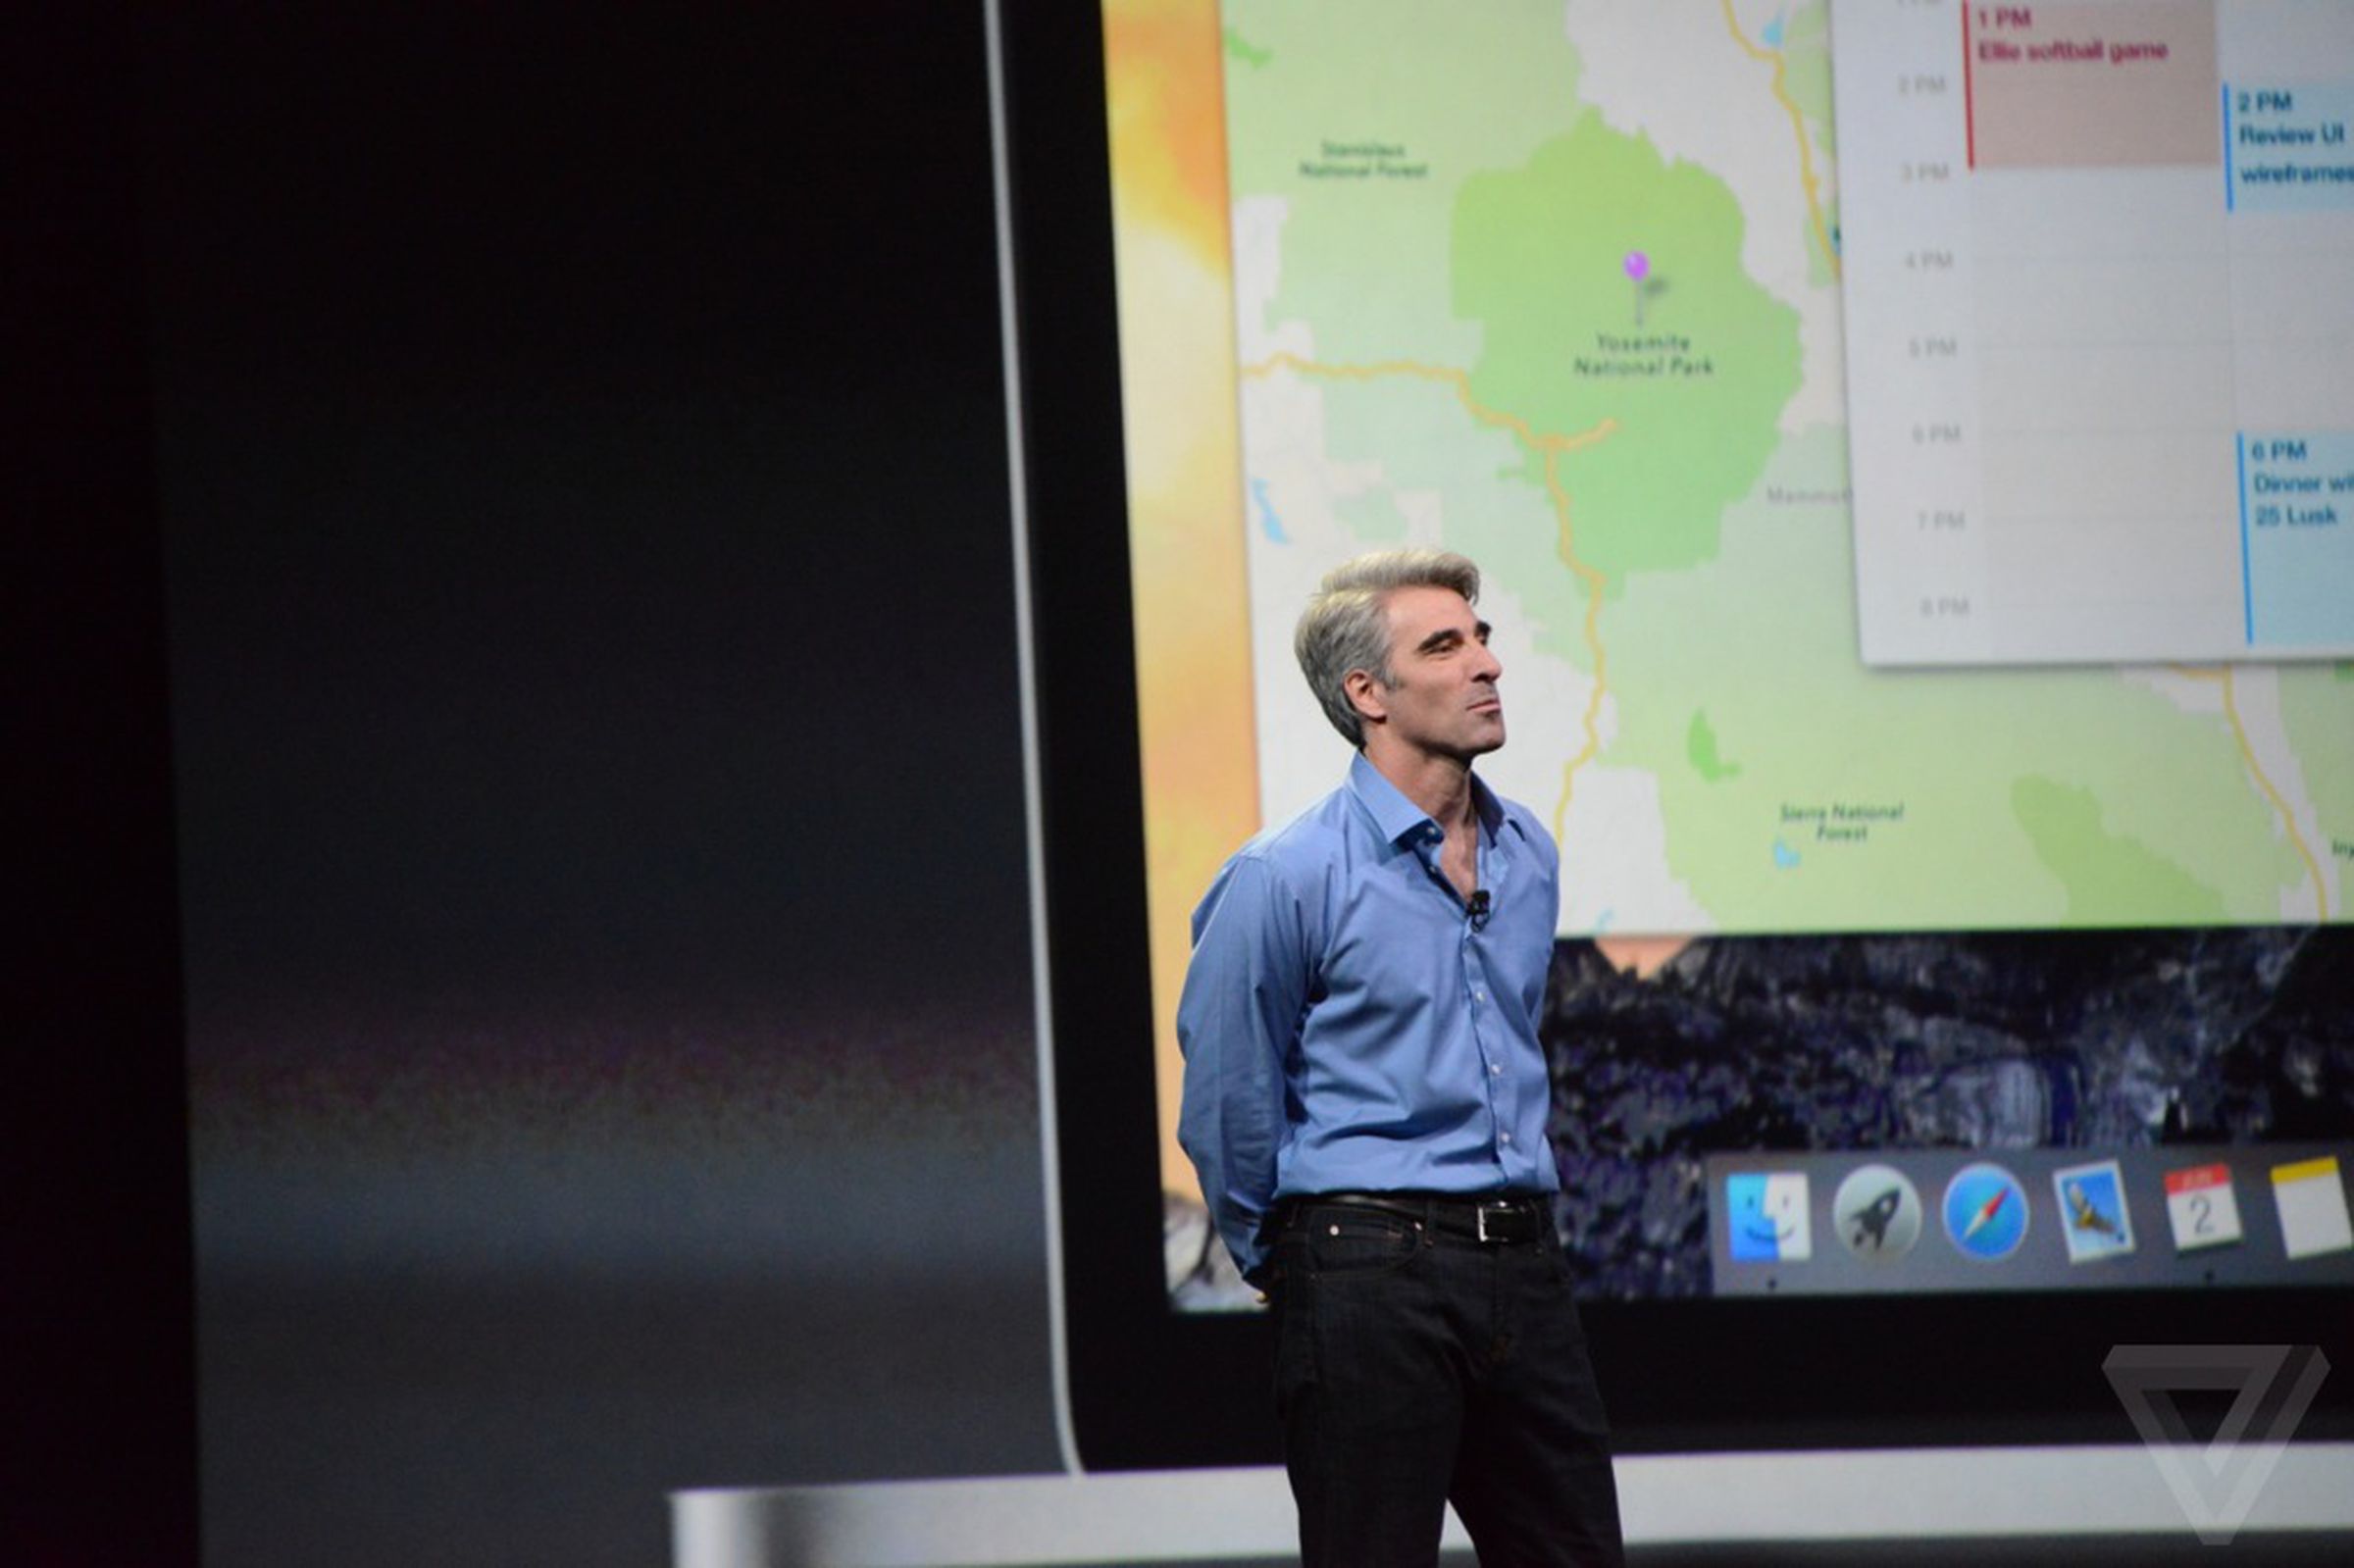 WWDC 2014 best moments photo gallery